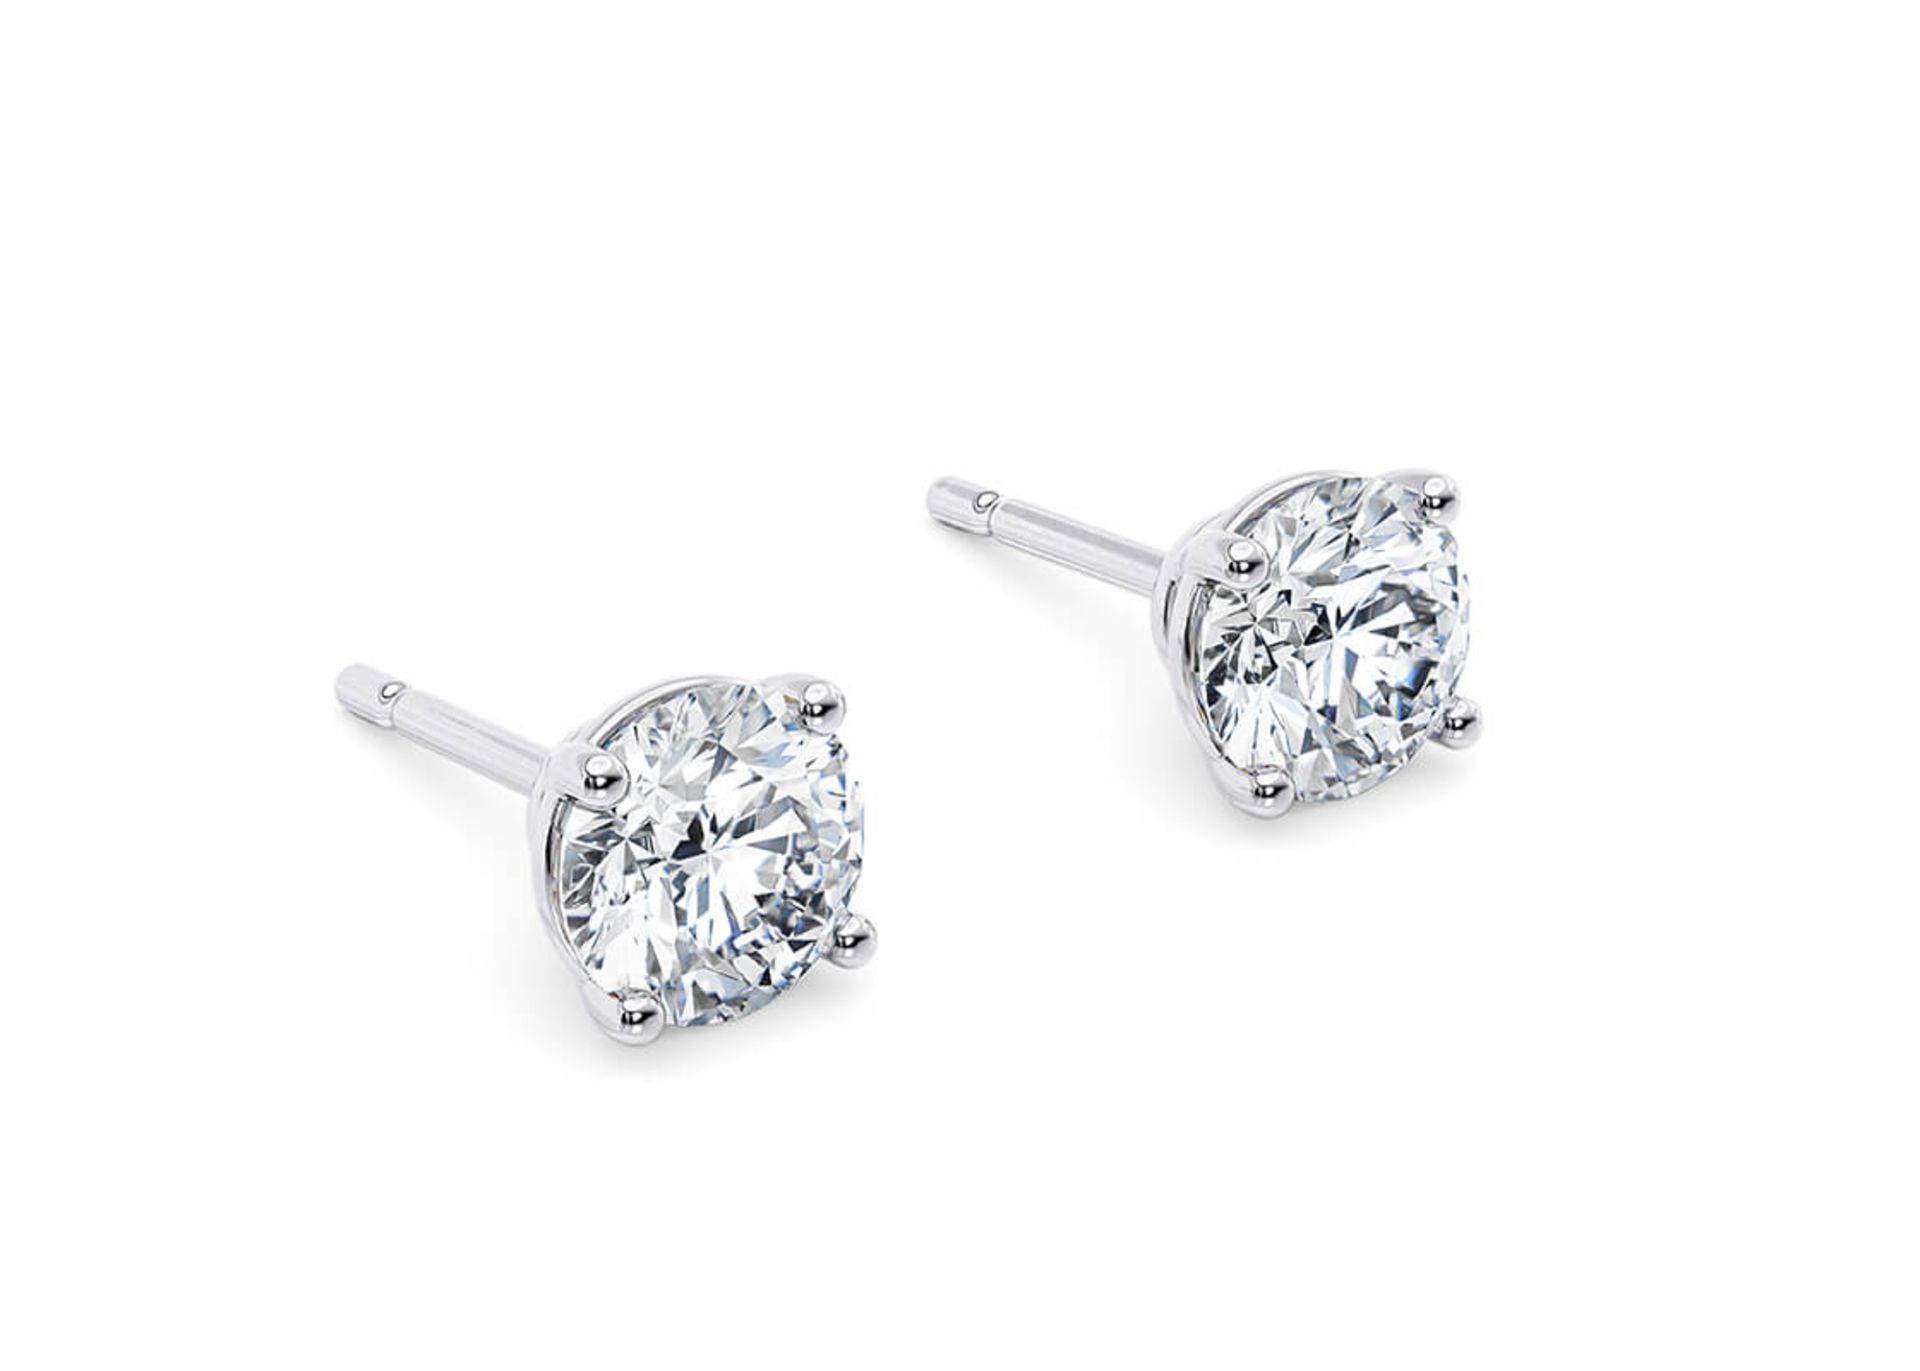 Round Brilliant Cut 3.00 Carat Diamond Earrings Set in 18kt White Gold - F Colour VS Clarity - GIA - Image 2 of 3